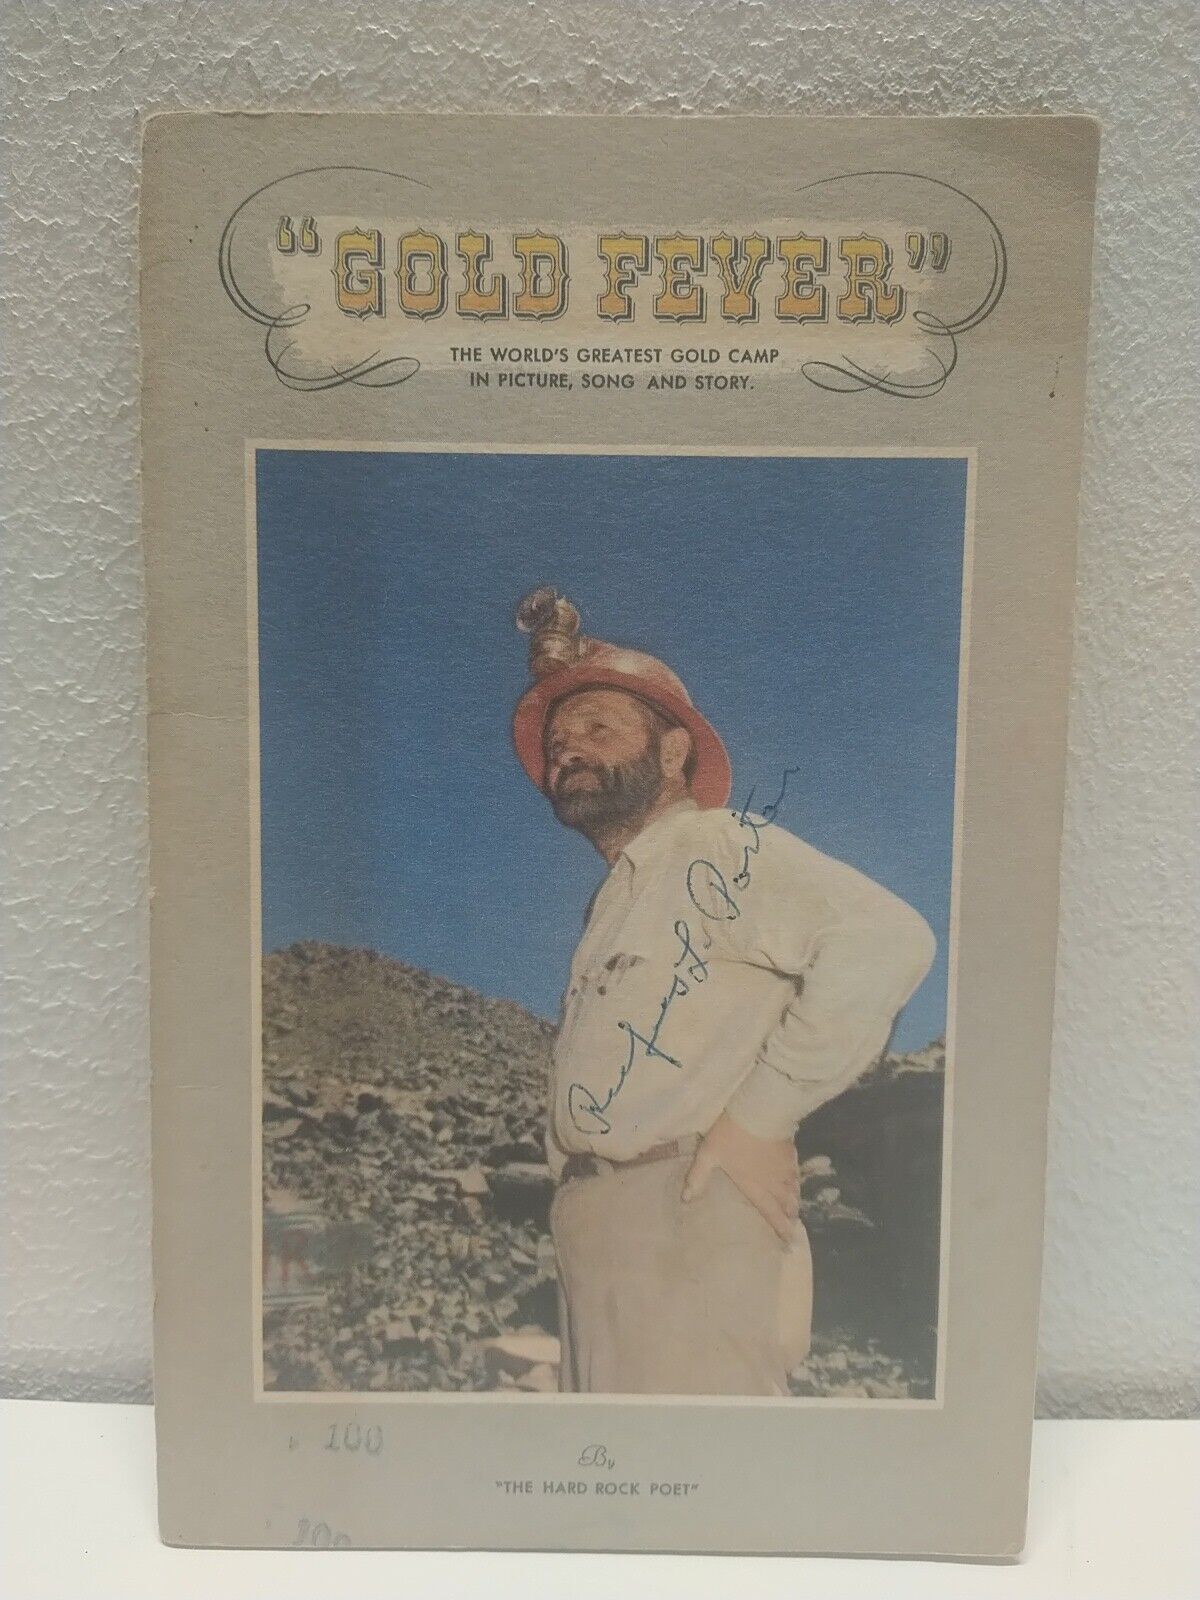 Gold Fever booklet by Rufus Porter (1954 signed) Cripple Creek gold camp stories